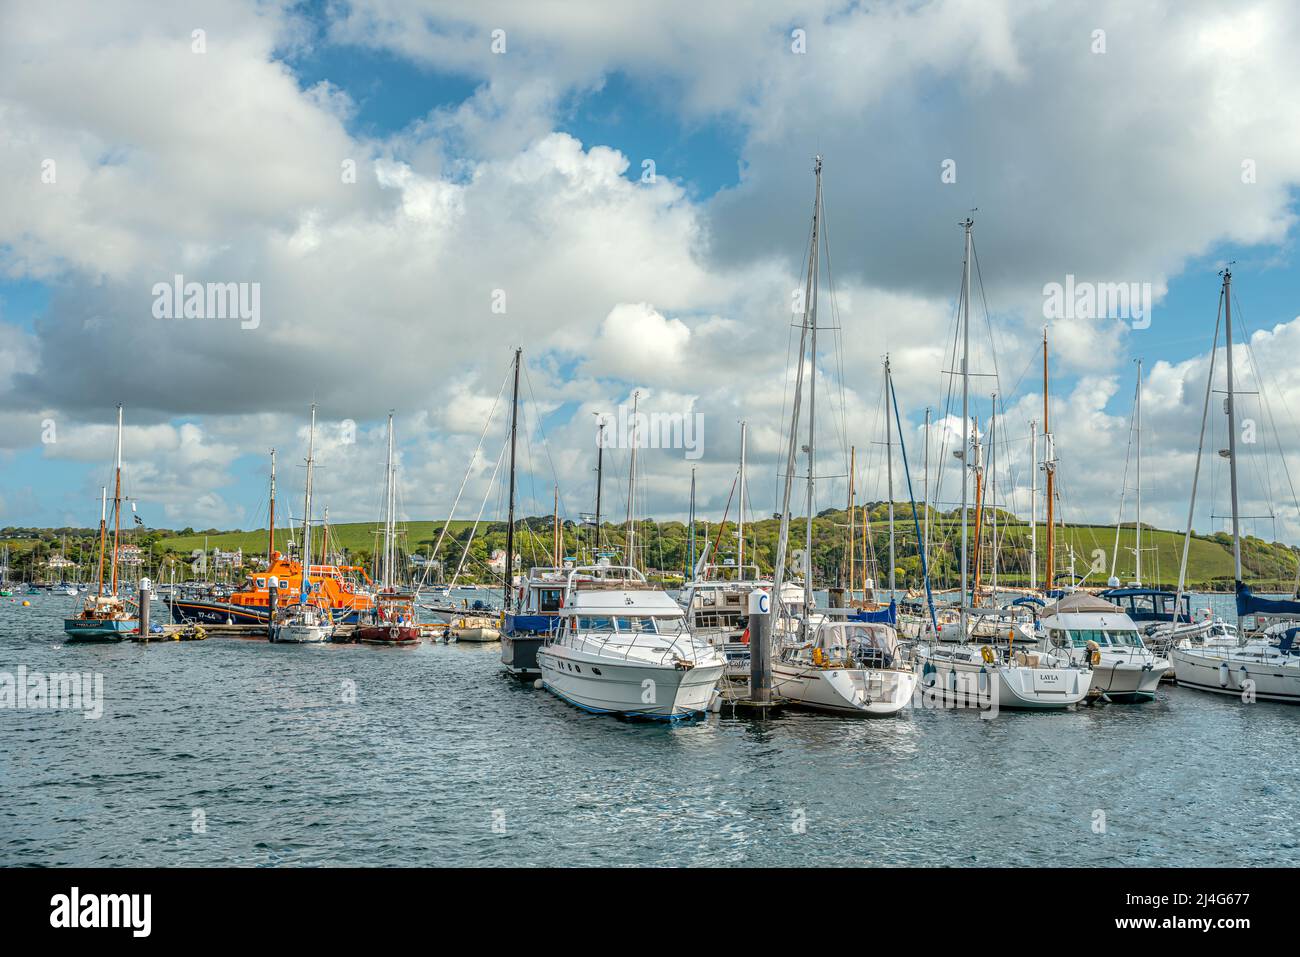 View over the Marina of Falmouth, Cornwall, England, UK Stock Photo